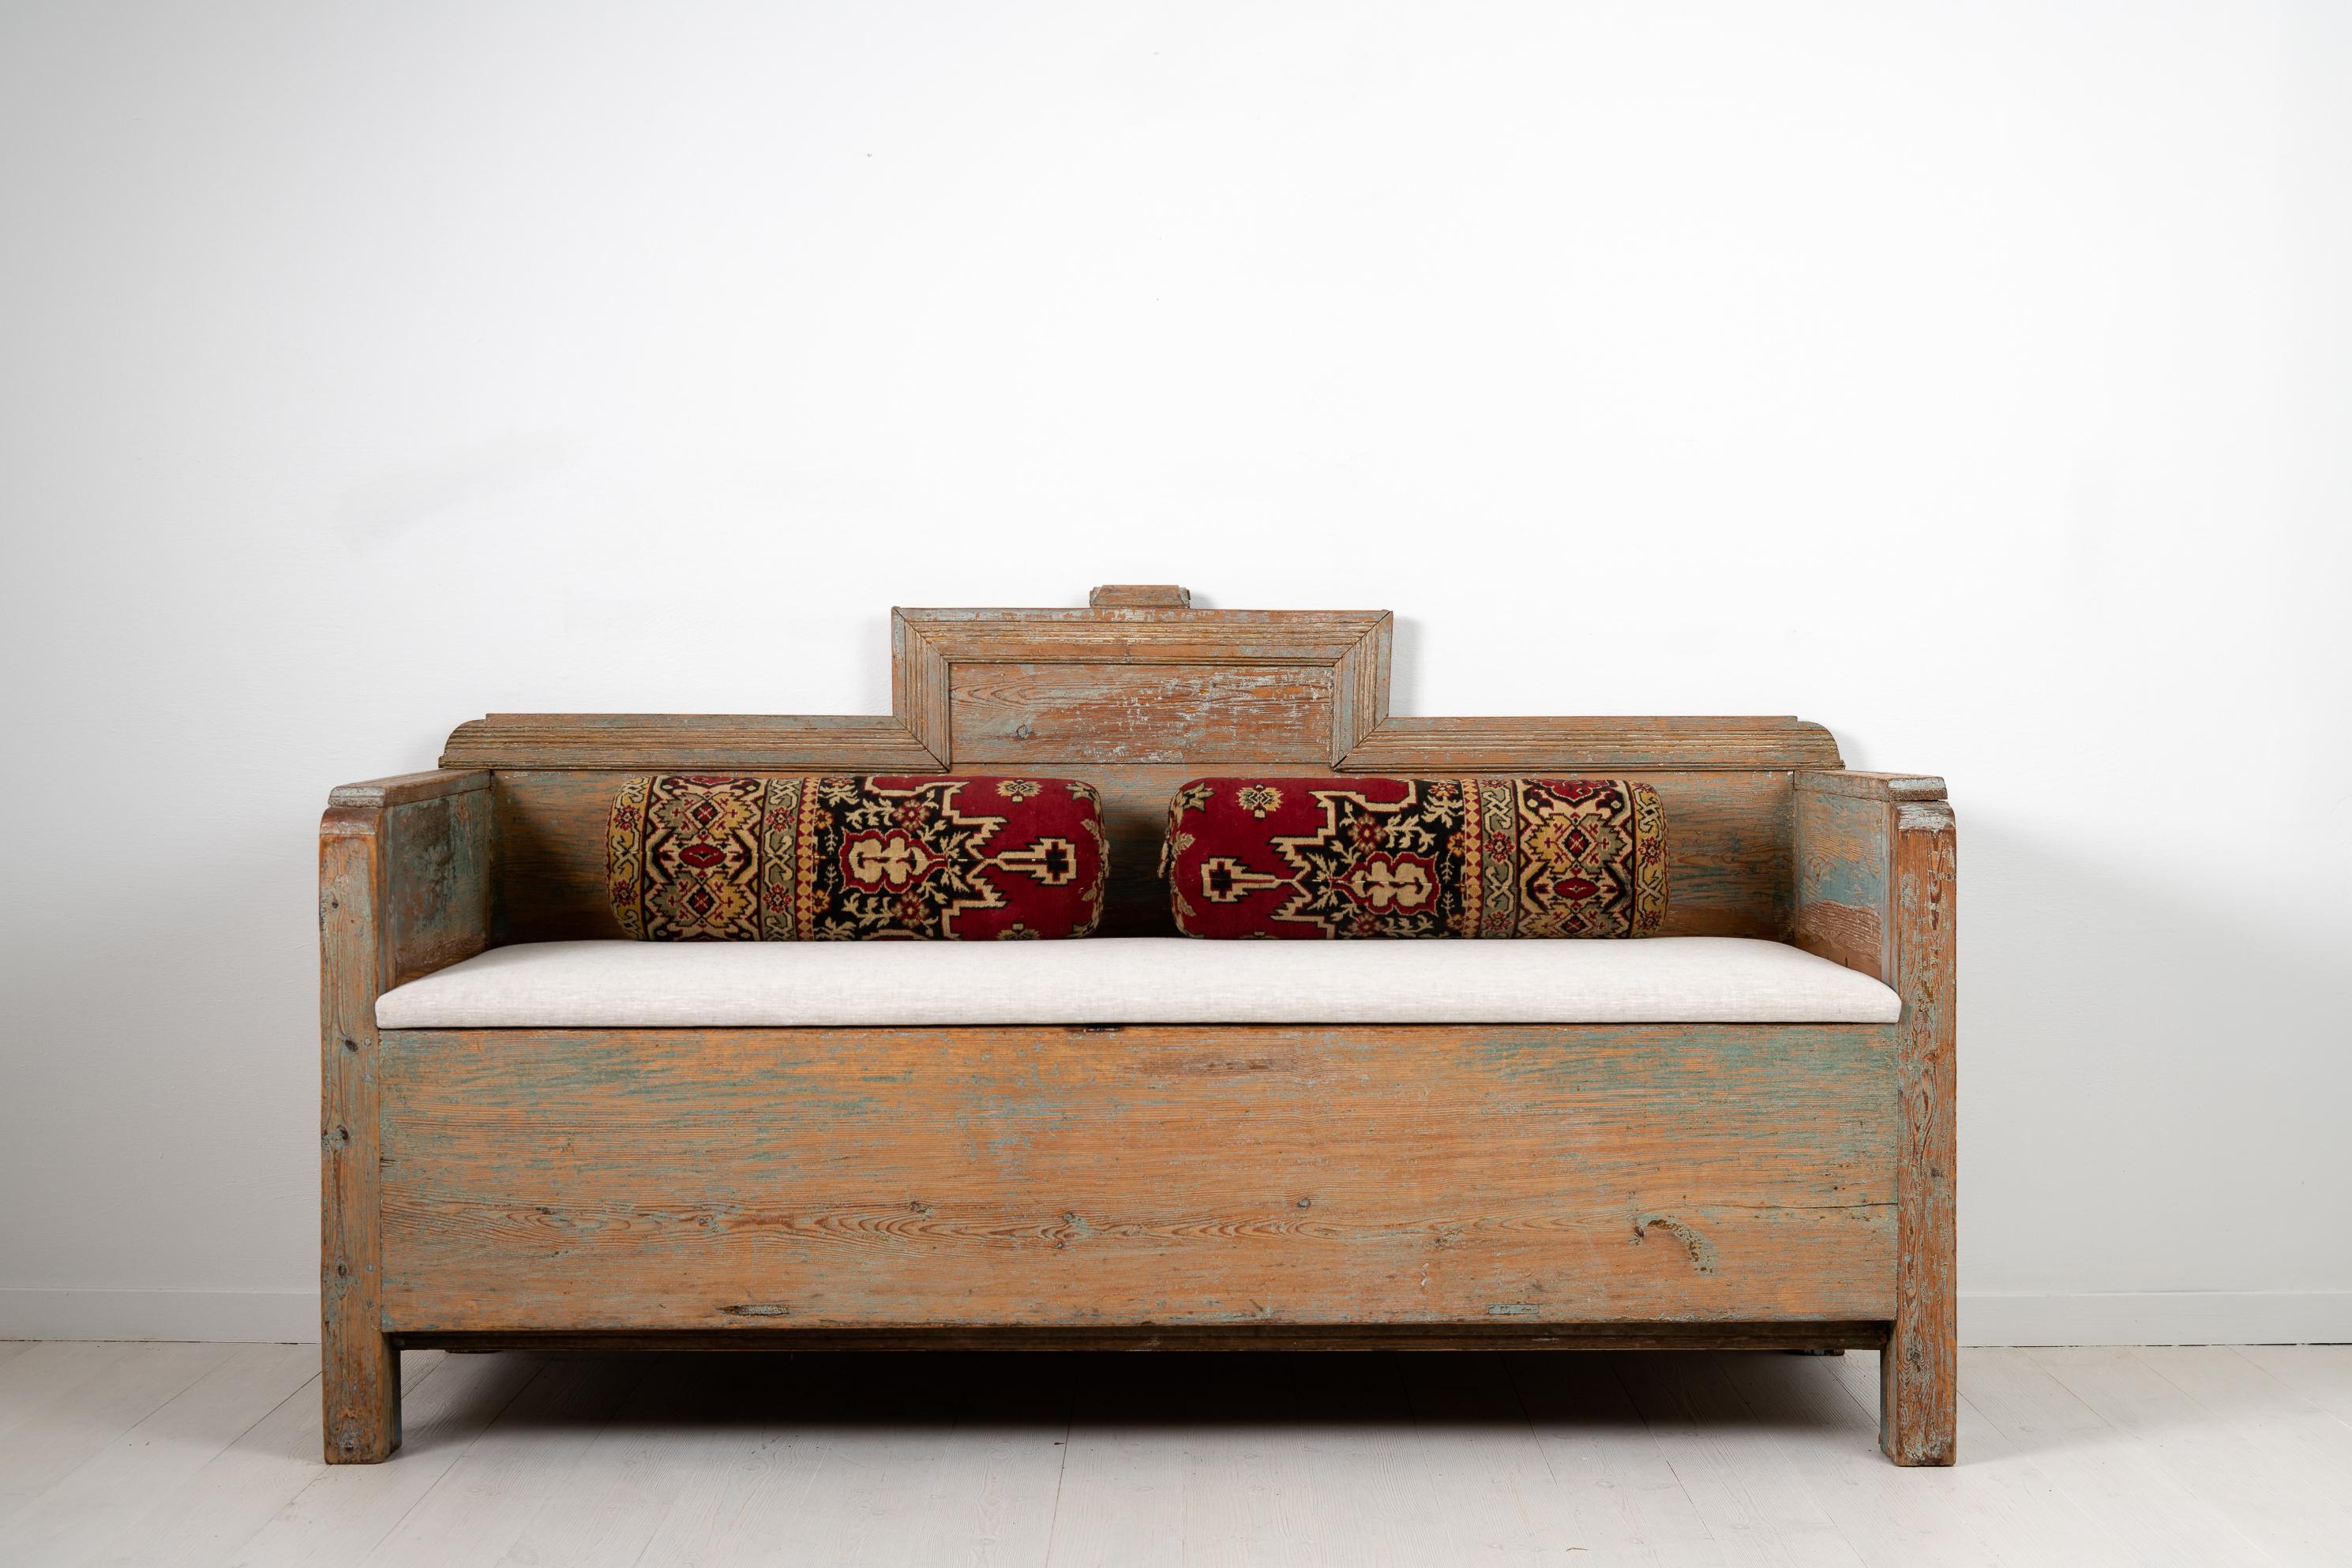 Early country sofa from Northern, Sweden. The straight shape and restrained decor was common during the late 1700s which is around the time the sofa was made. Made in painted pine with traces of the original blue paint. Wooden decor around the crown